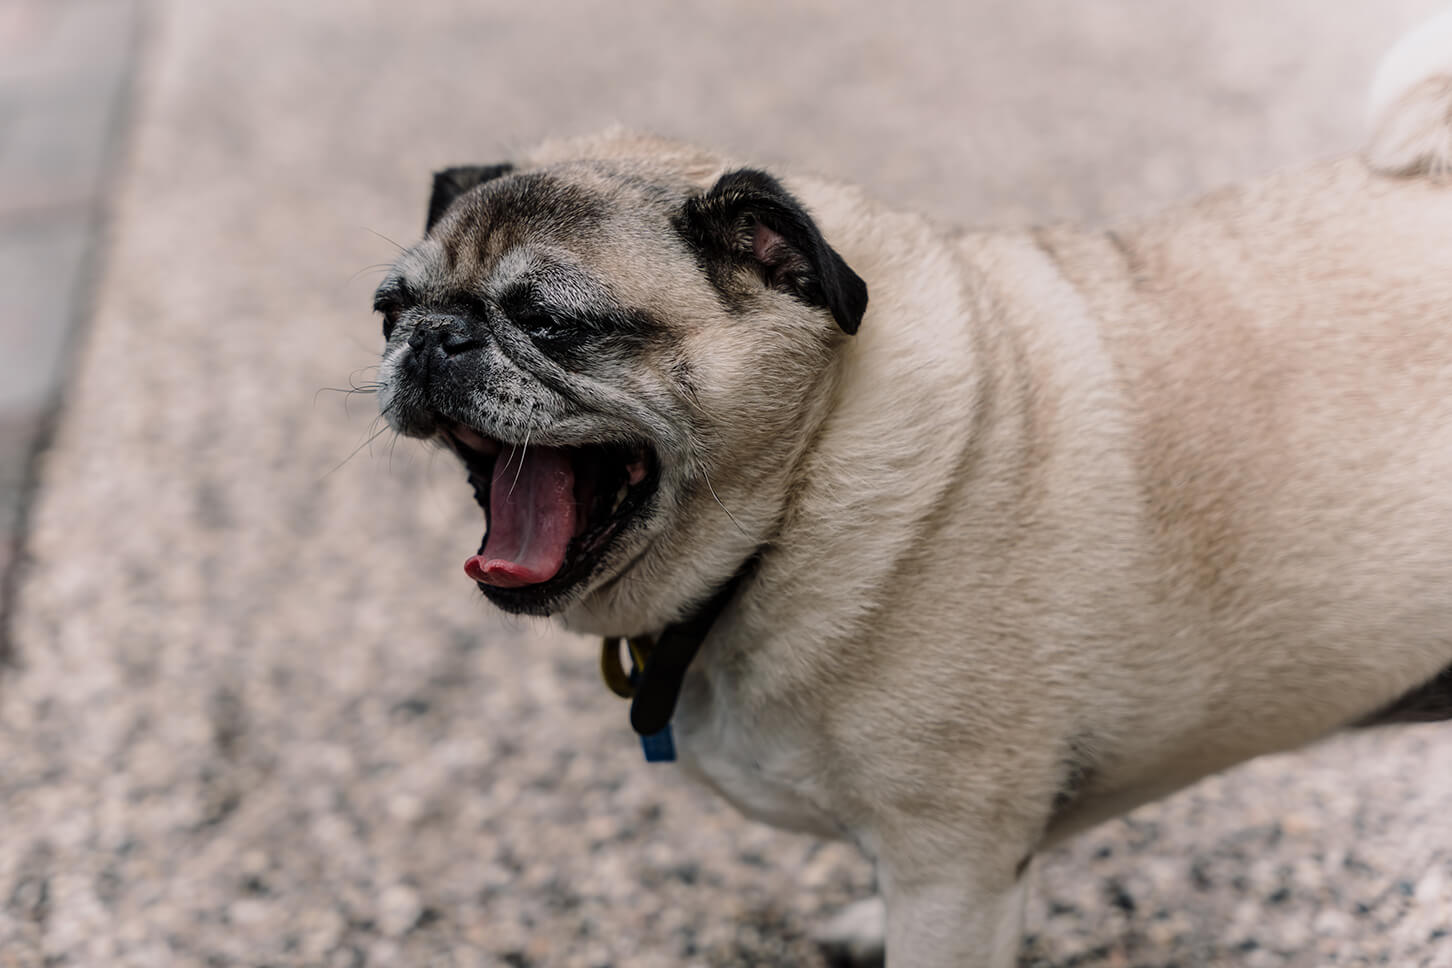 Awesome ways to include your pet in the wedding, cute pug yawning while waiting for the bride and groom, captured by Black Avenue Productions